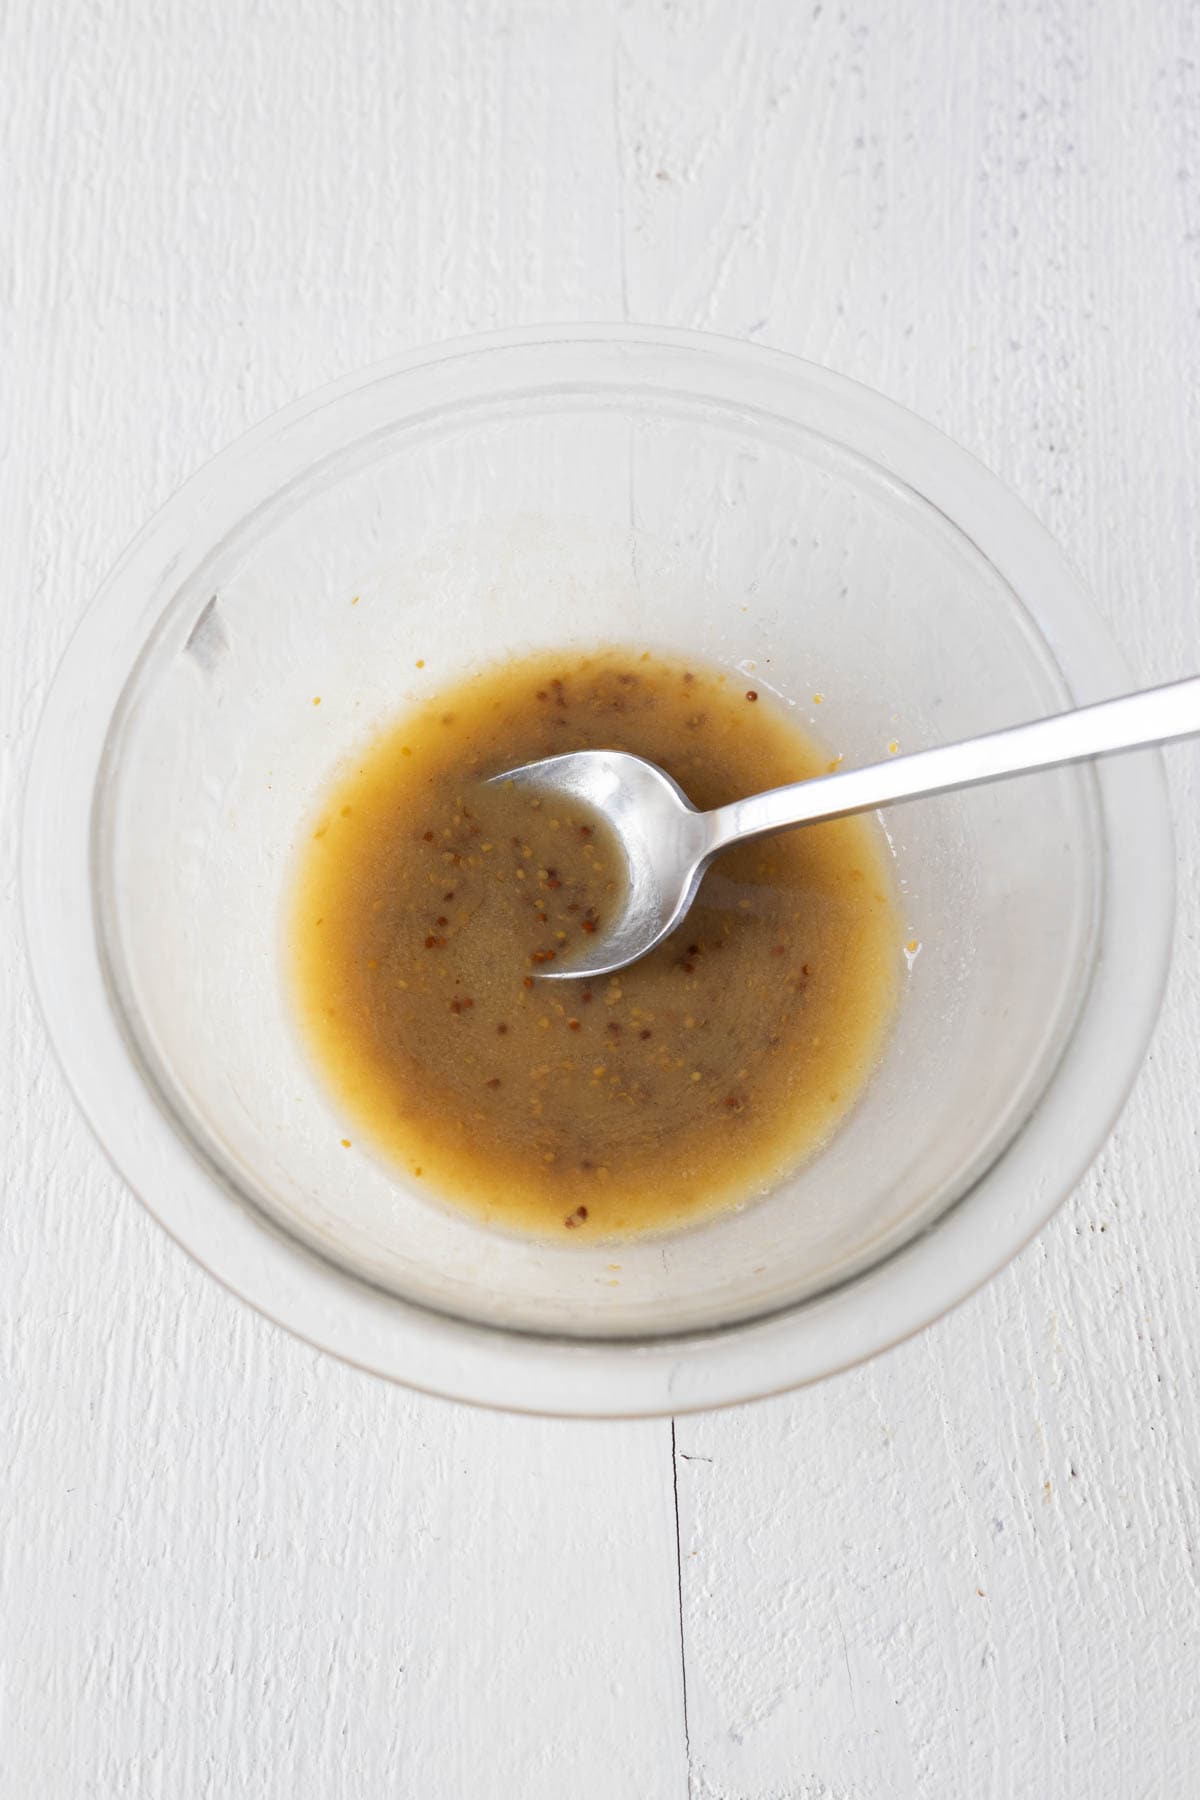 Melted butter and mustard sauce in a glass mixing bowl with a spoon.